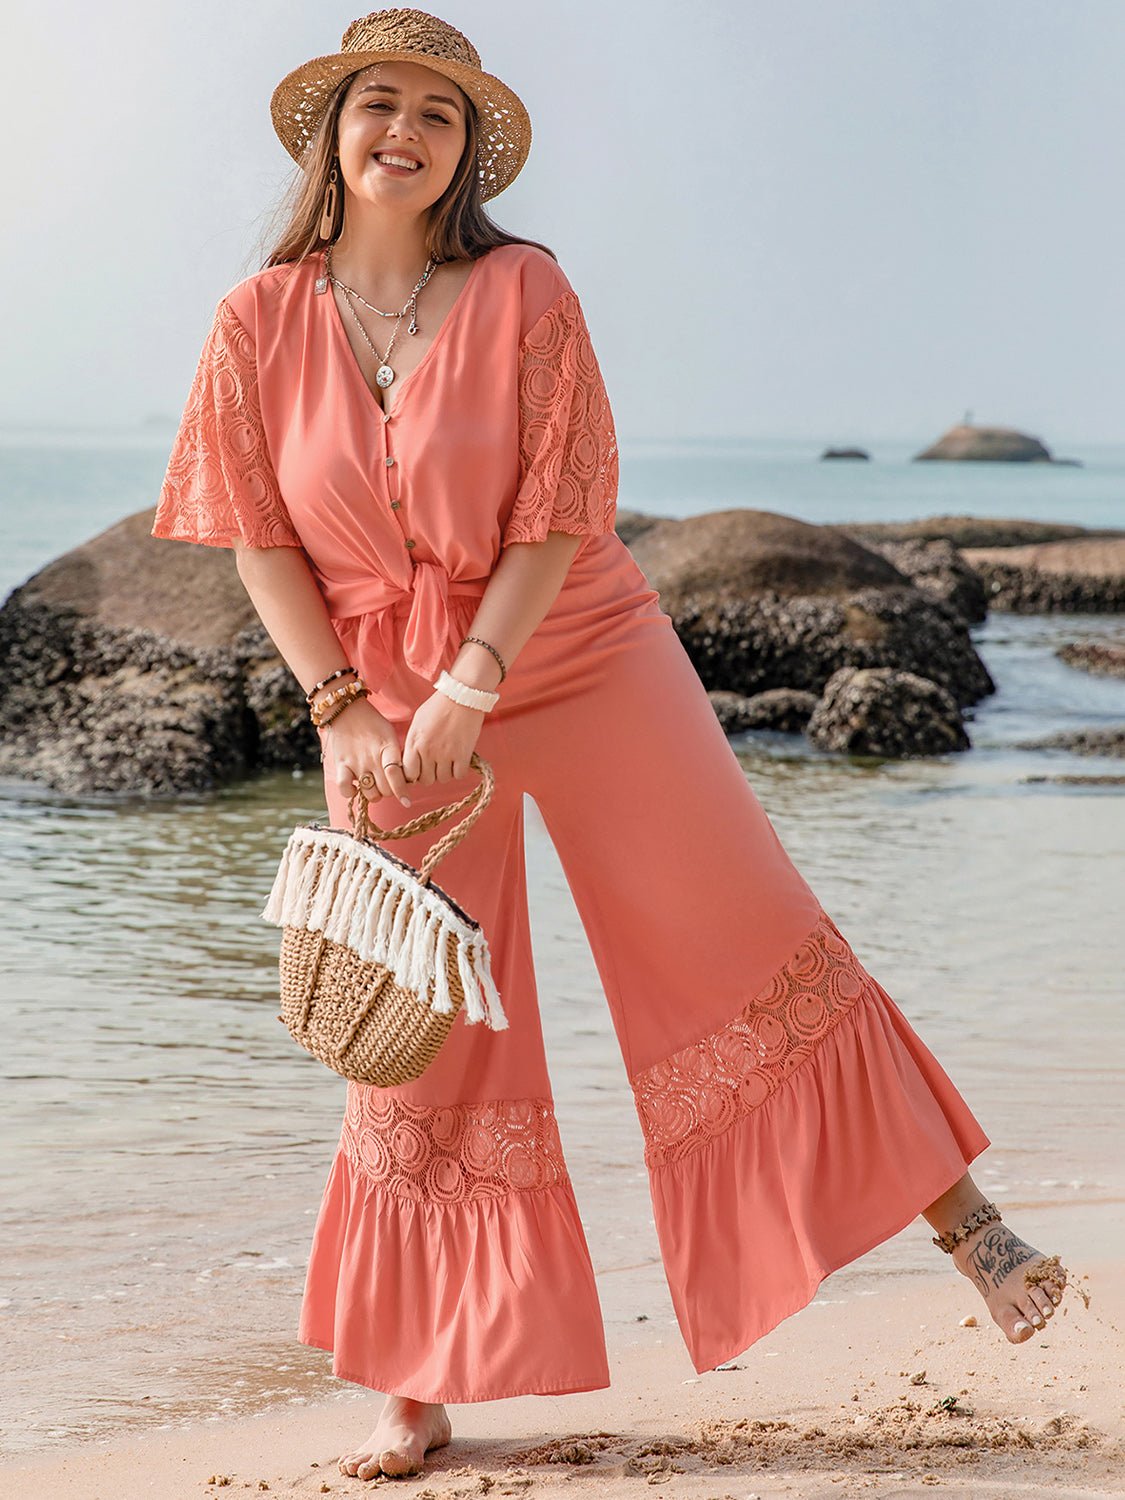 Plus Size Button Up Half Sleeve Top and Pants Set in CoralPants SetBeach Rose Co.